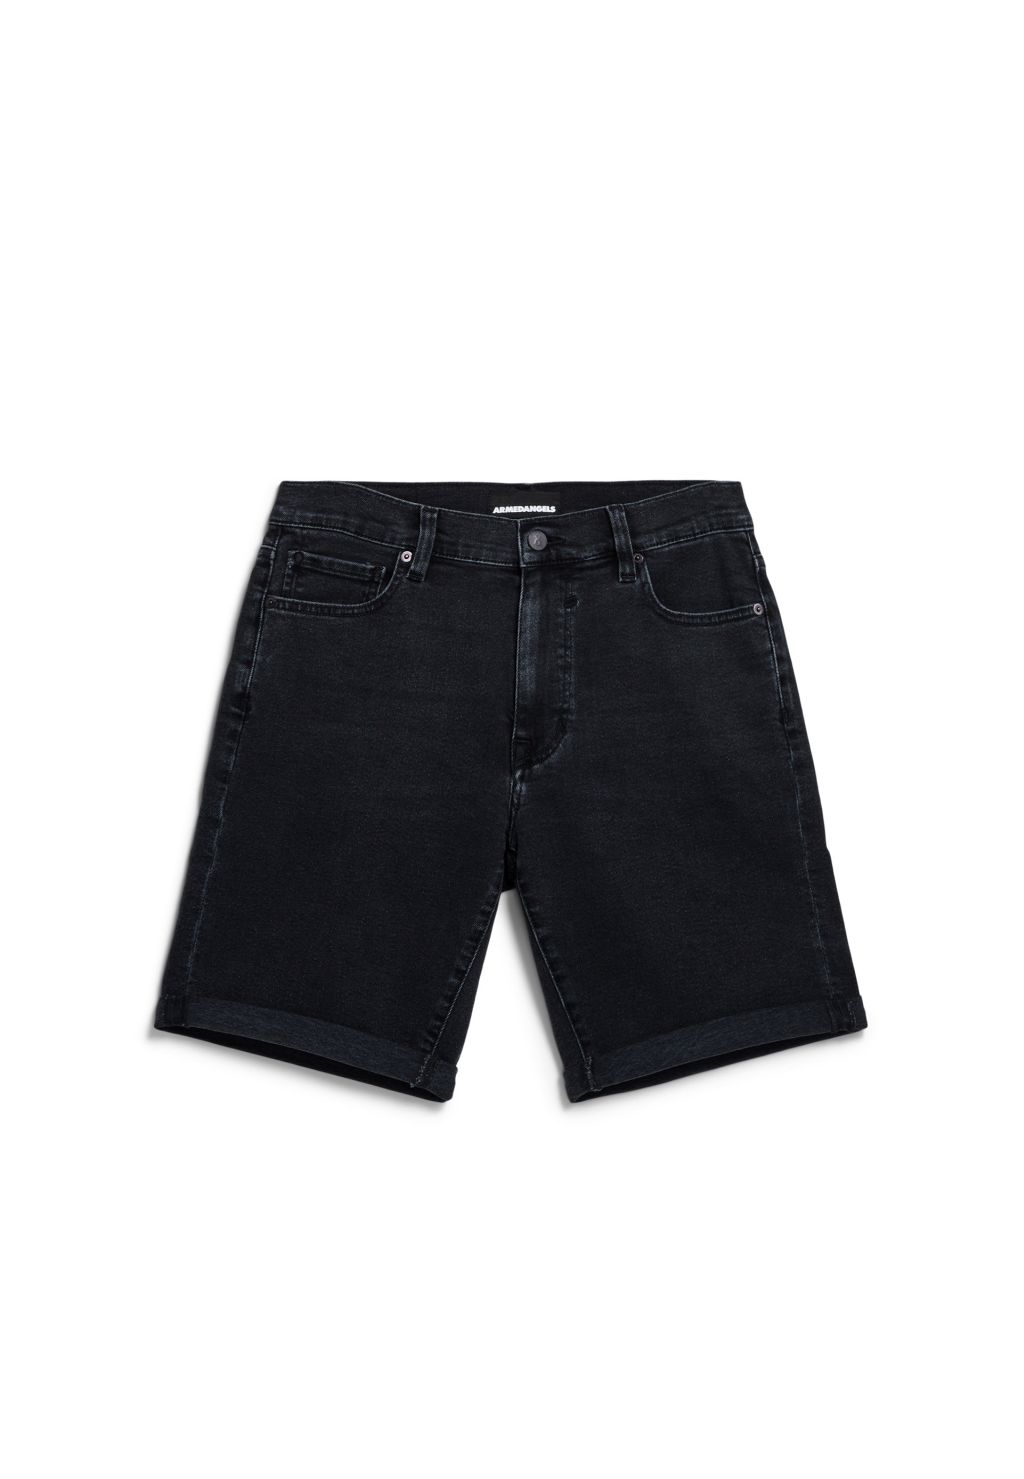 Naailo Black DNM Black Washed Authentic  31